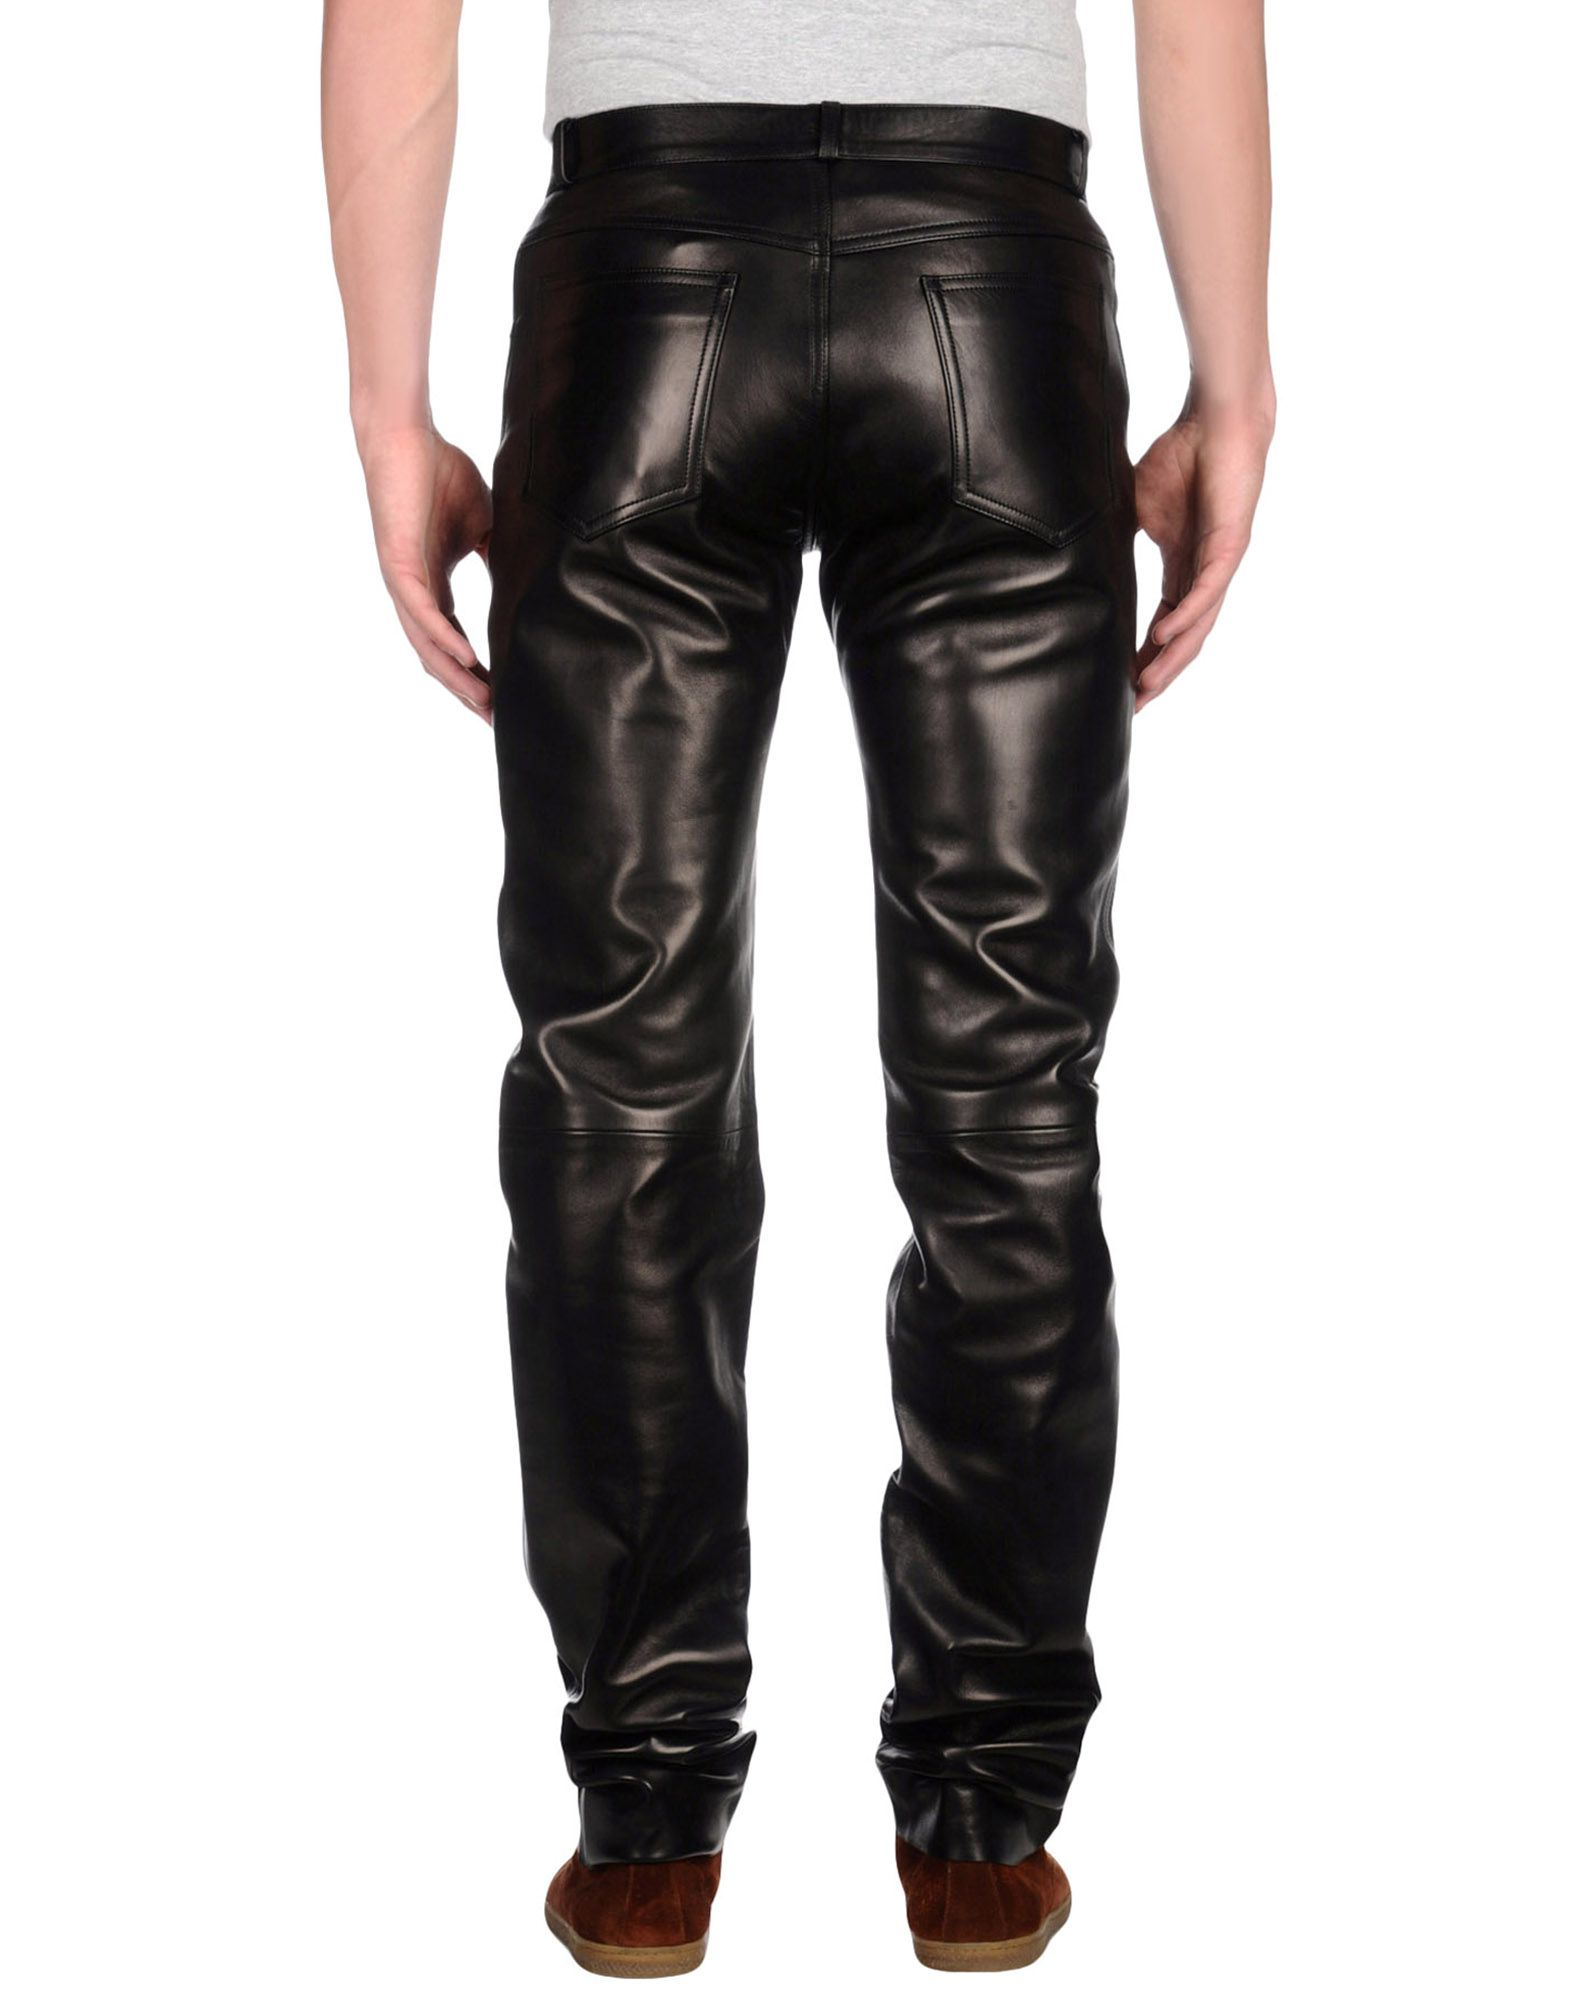 Lyst - Gucci Leather Pants in Black for Men